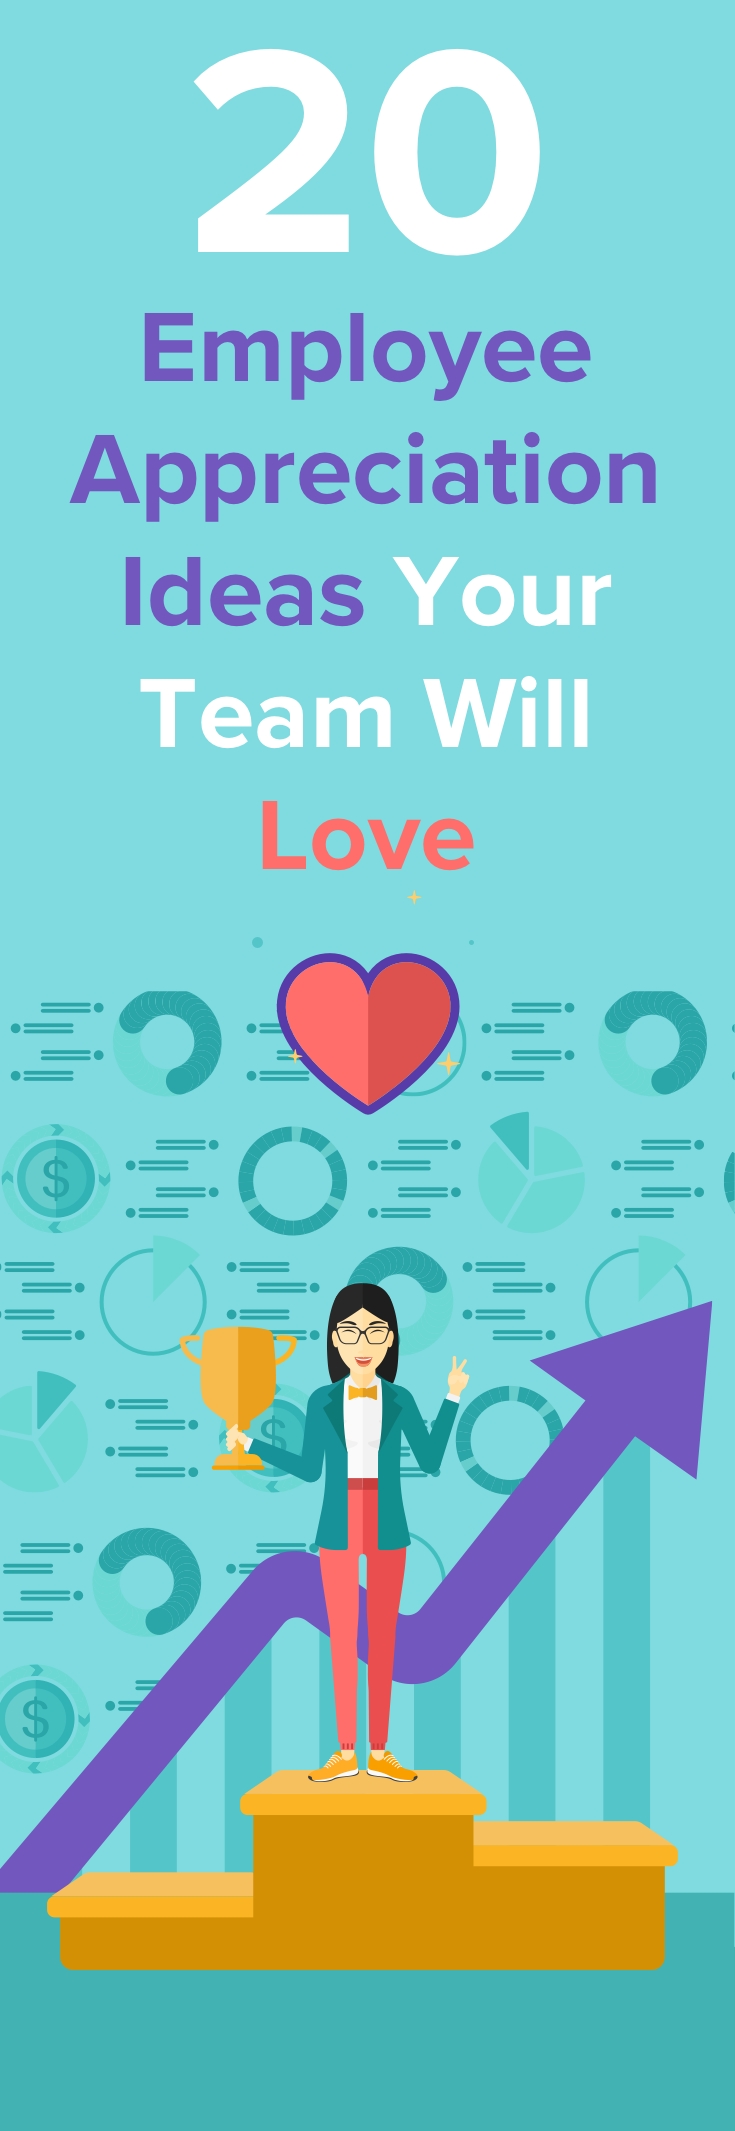 10 Beautiful Low Cost Employee Recognition Ideas 20 employee appreciation ideas your team will love employee 2022